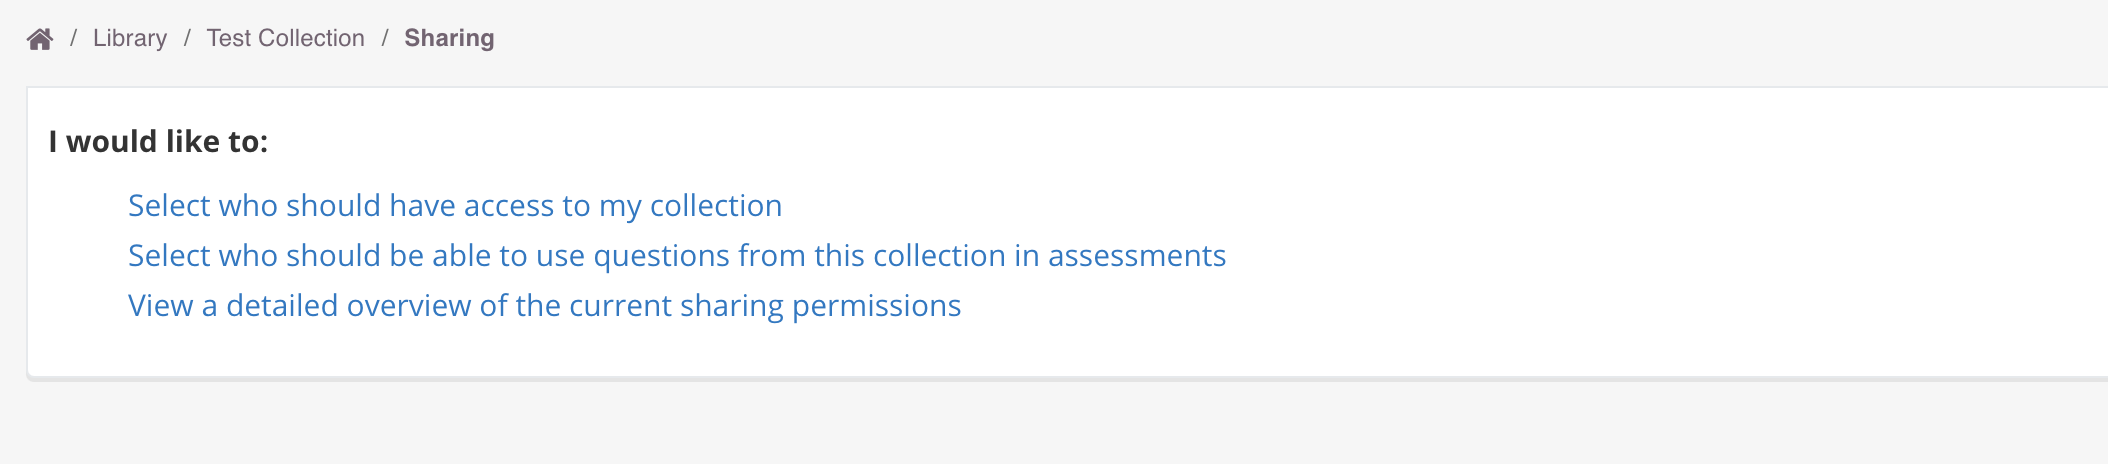 1. Select who should have access to my collection 2. Select who should be able to use questions from this collection in assessments 3. View a detailed overview of the current sharing permissions